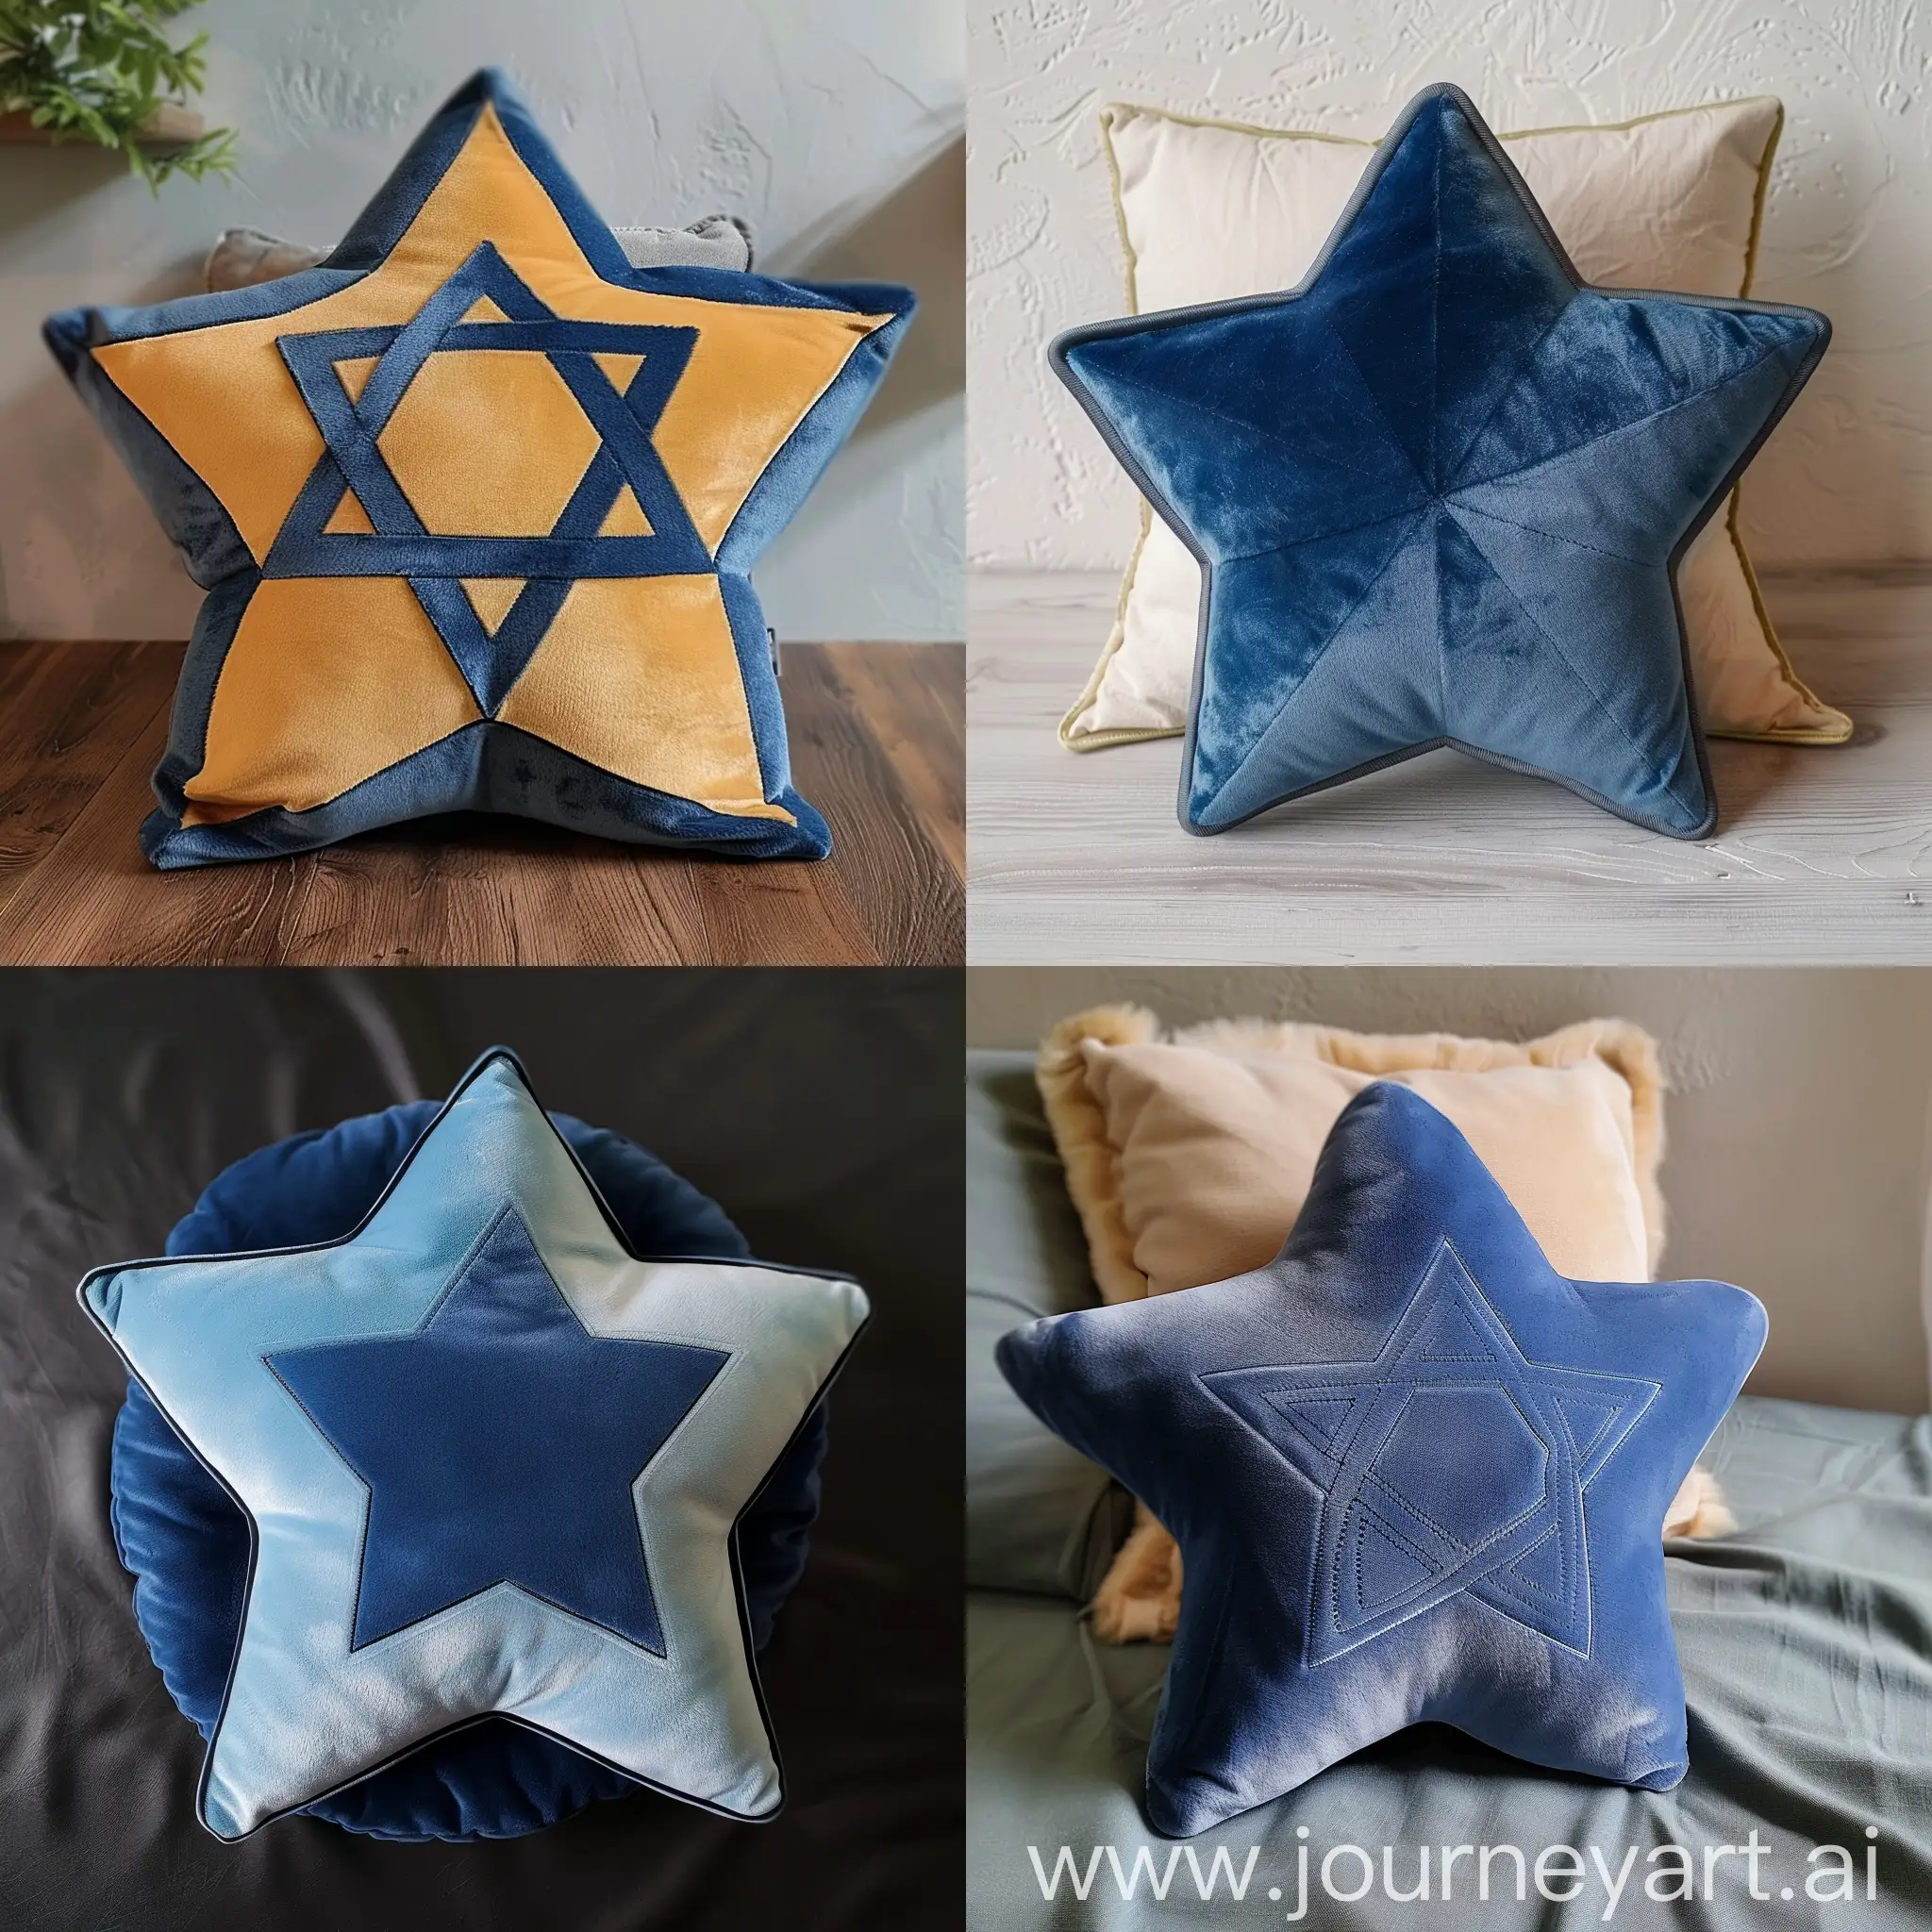 A pillow shaped like the star of Israel